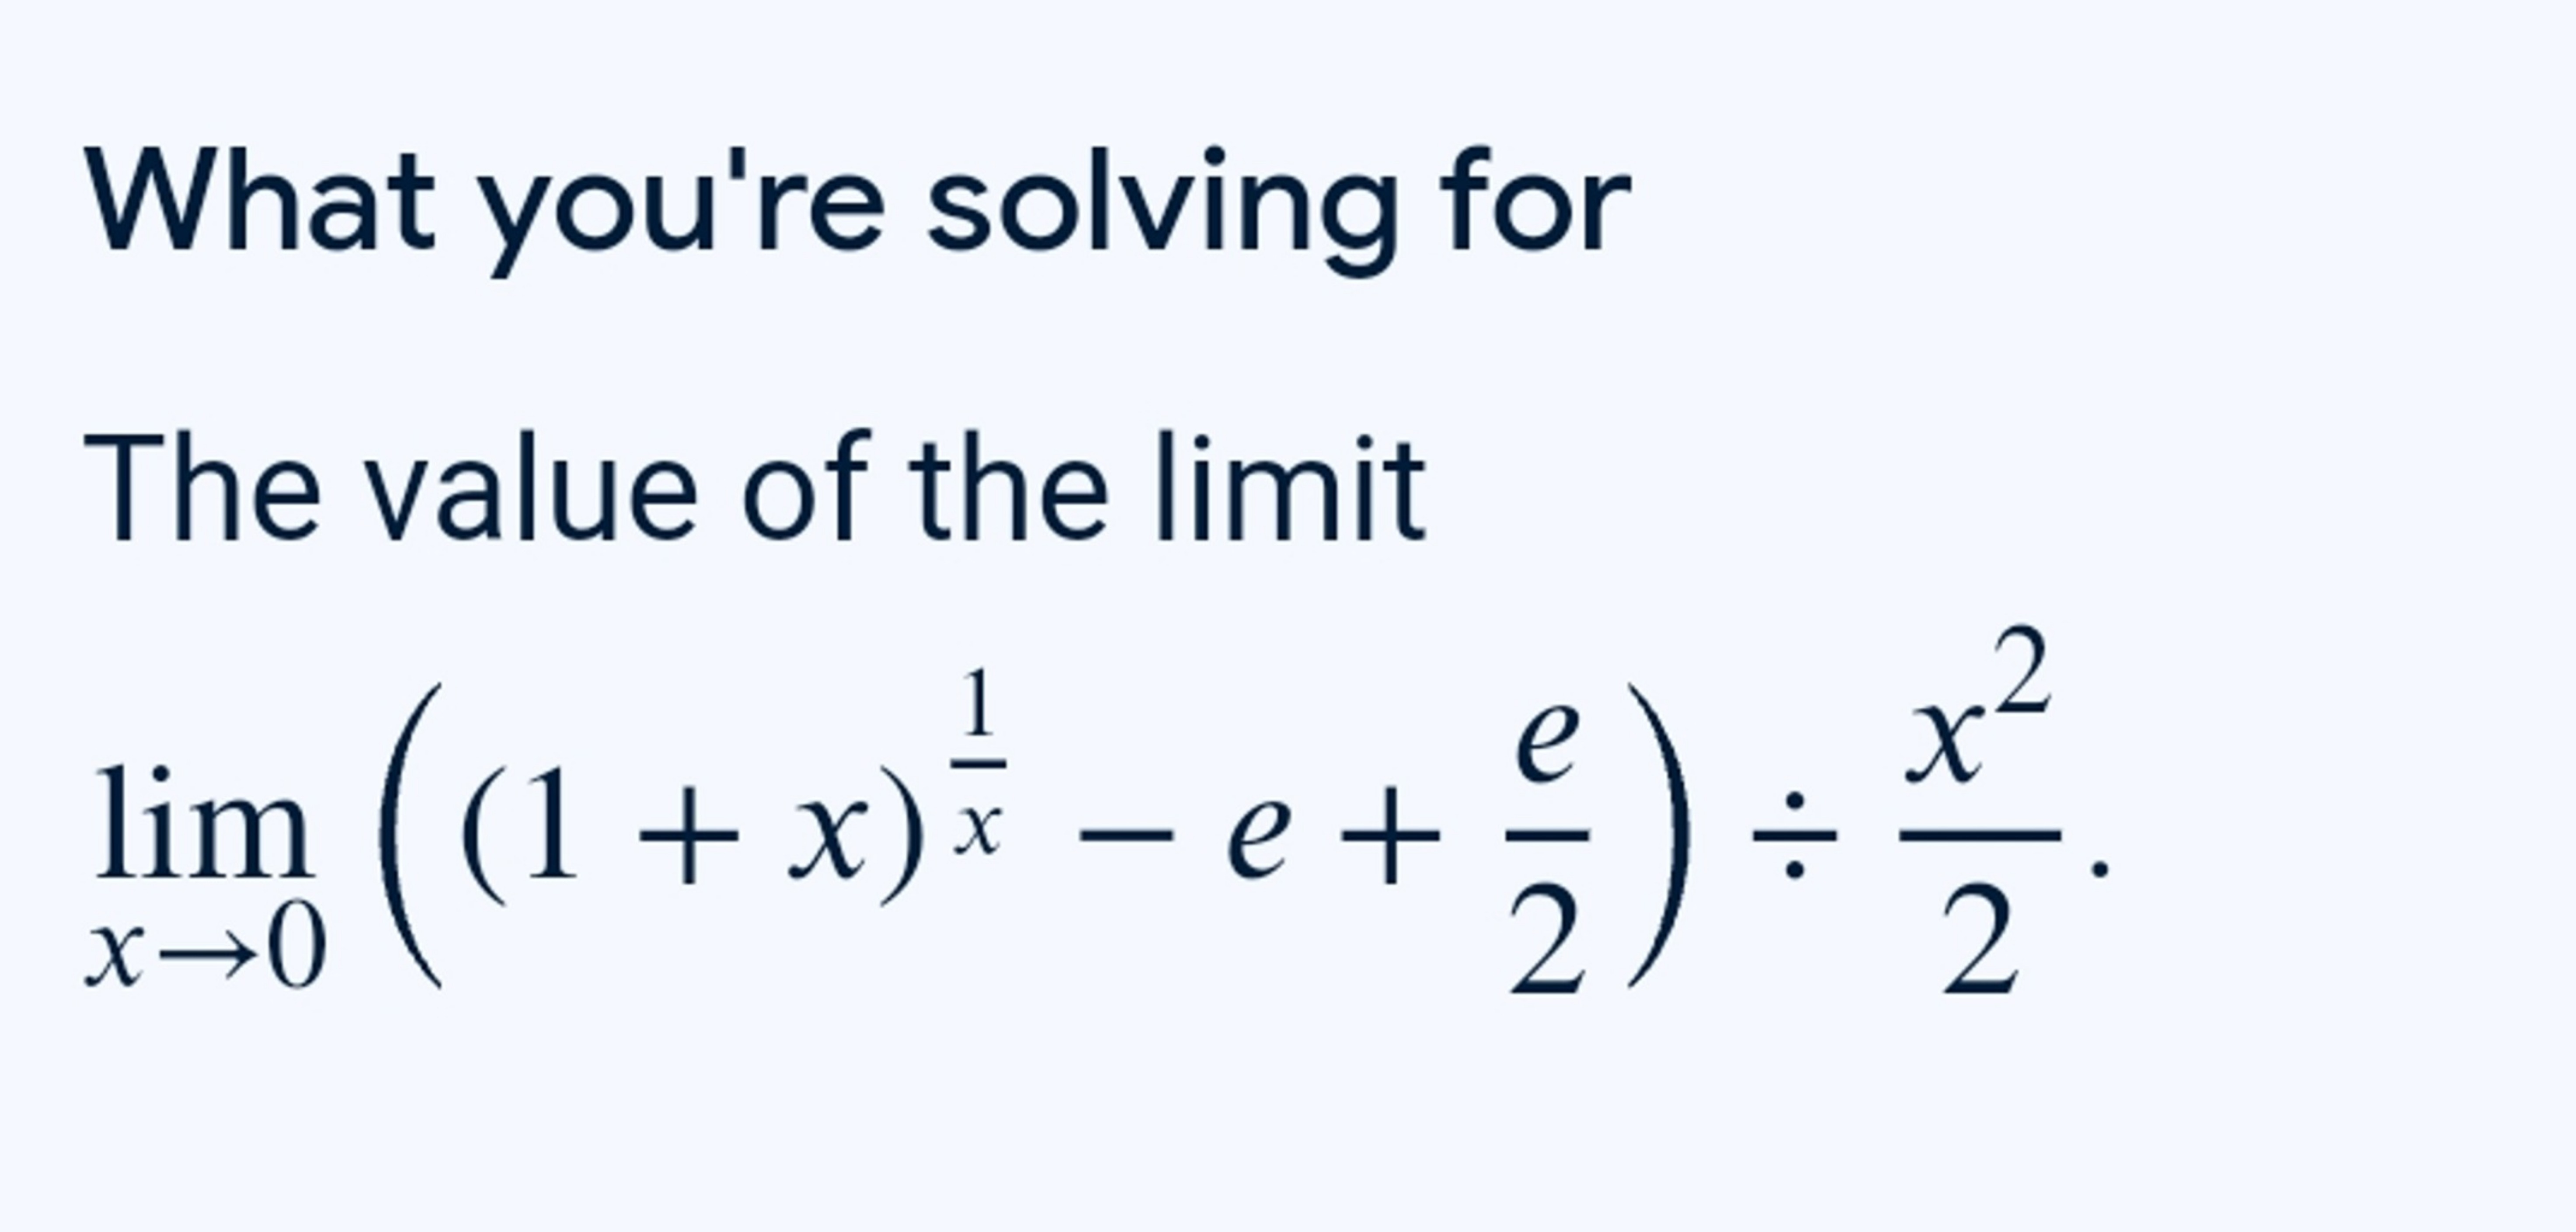 What you're solving for
The value of the limit
limx→0​((1+x)x1​−e+2e​)